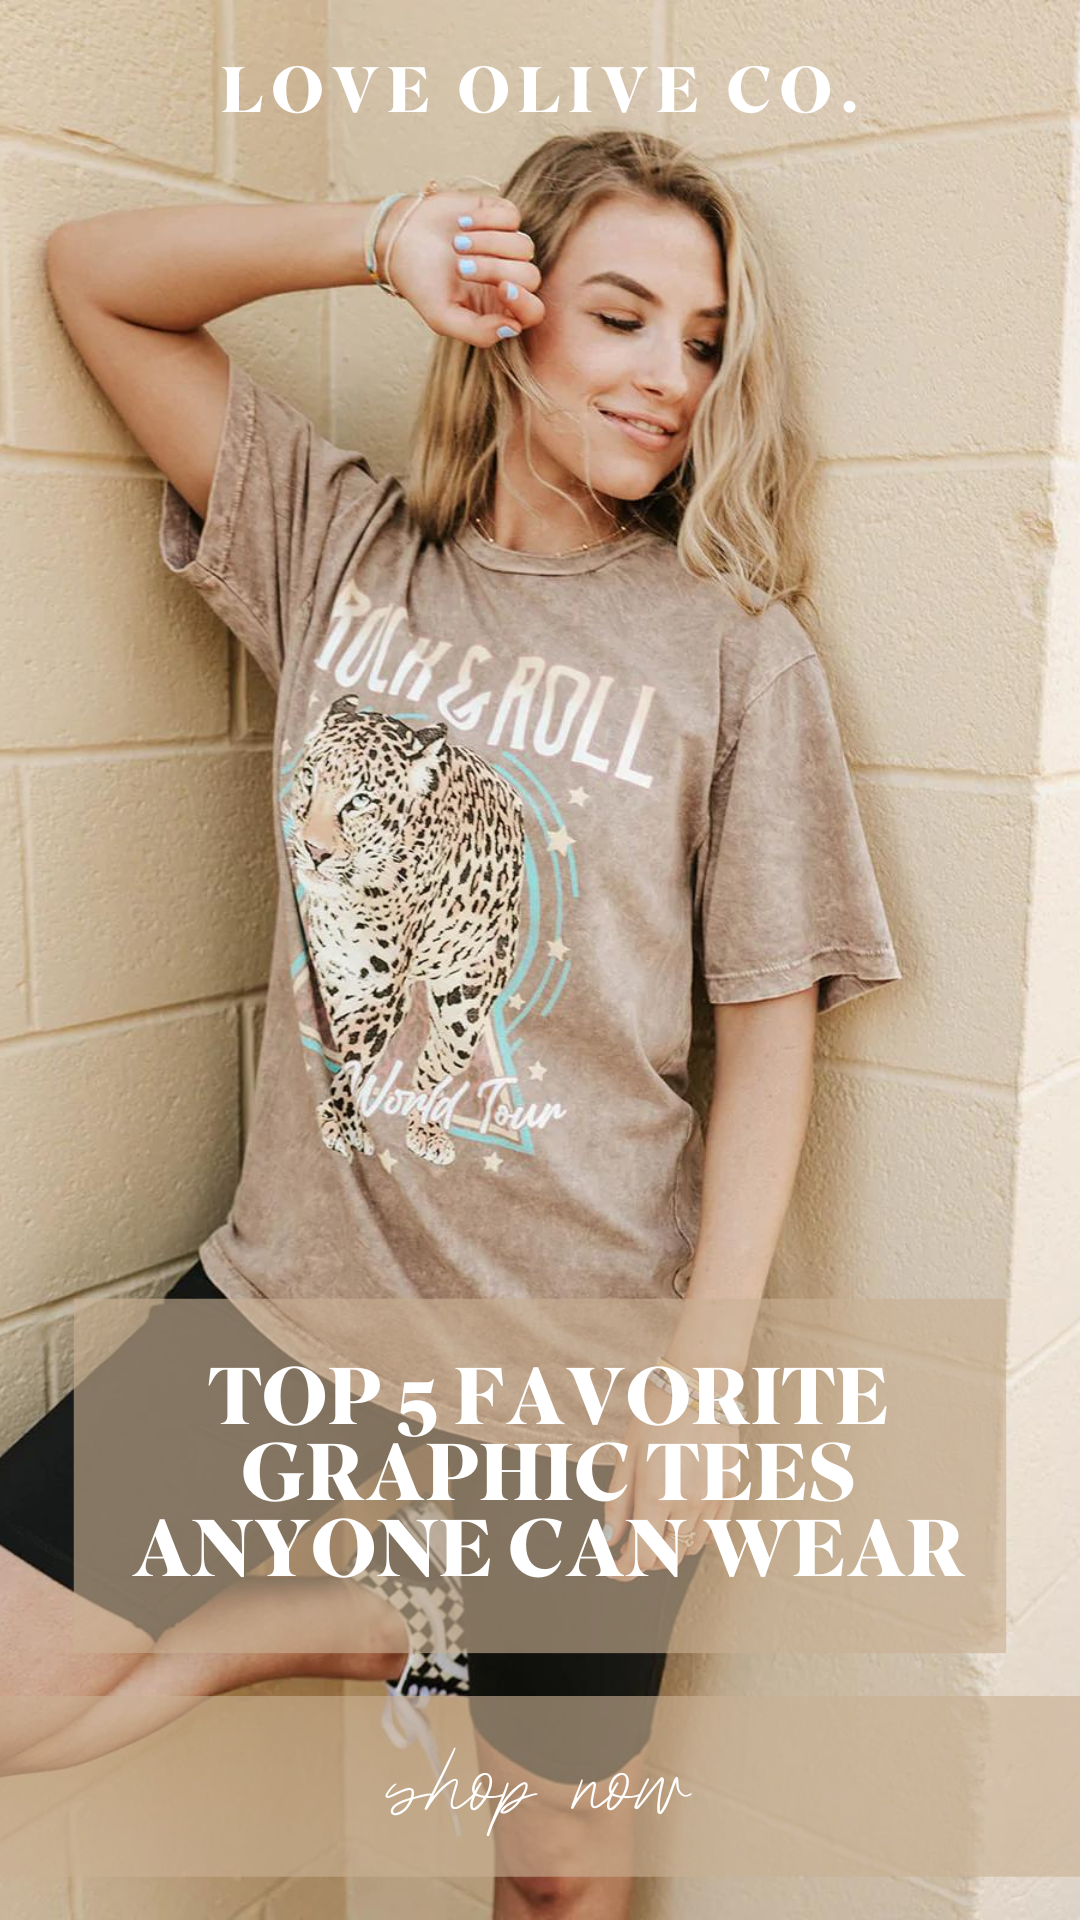 top 5 graphic tees anyone can wear. www.loveoliveco.com